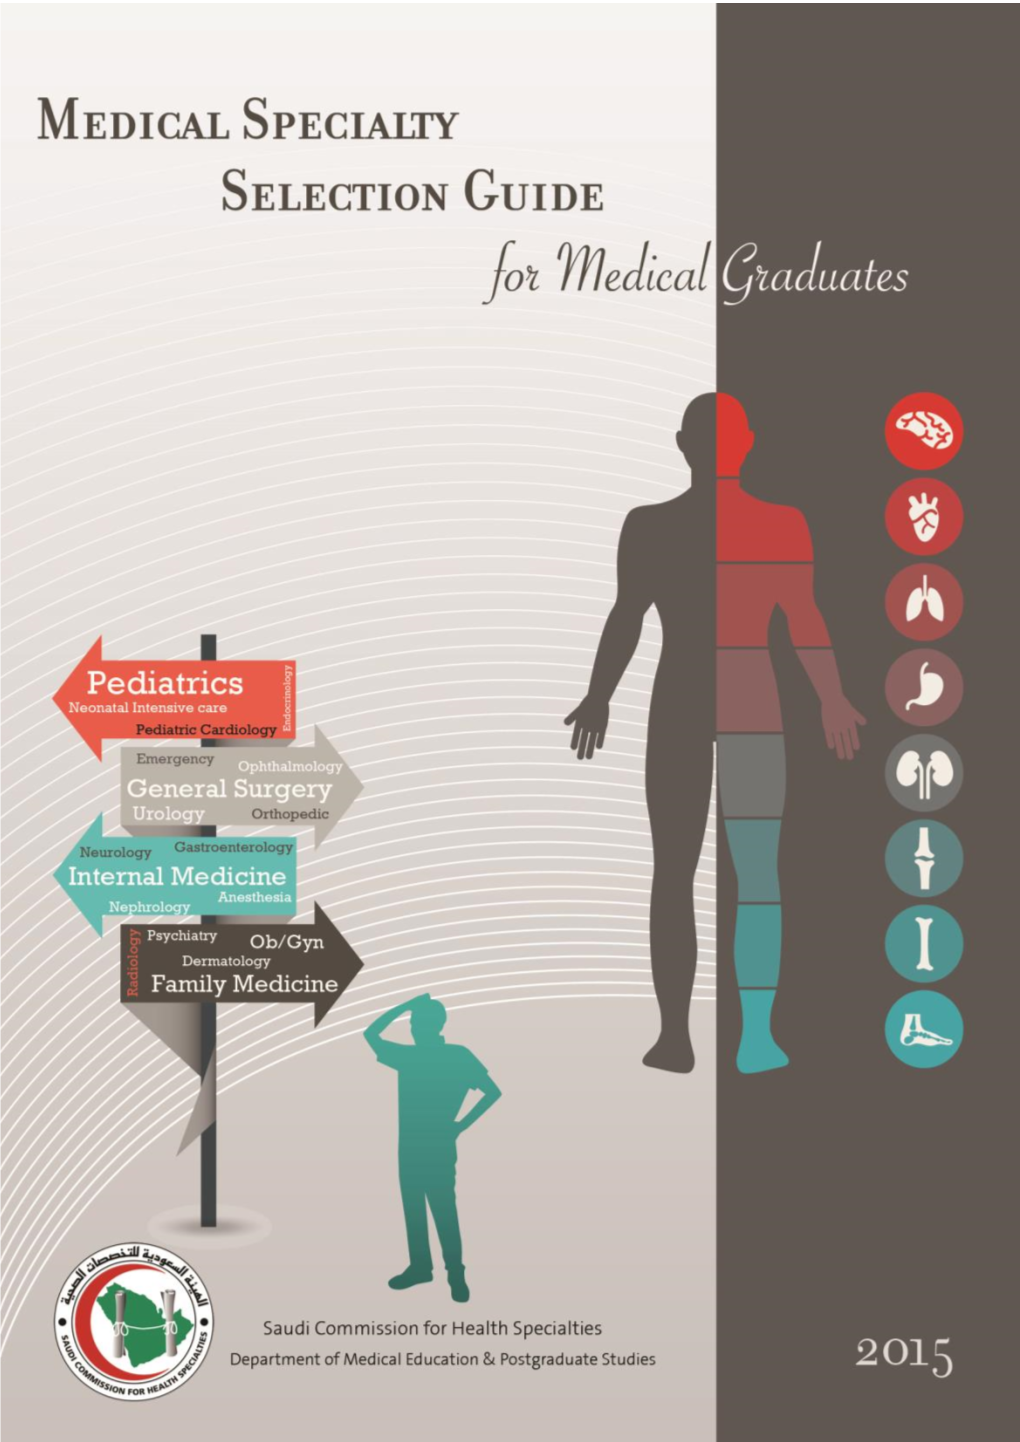 Medical Specialty Selection Guide for Medical Graduates